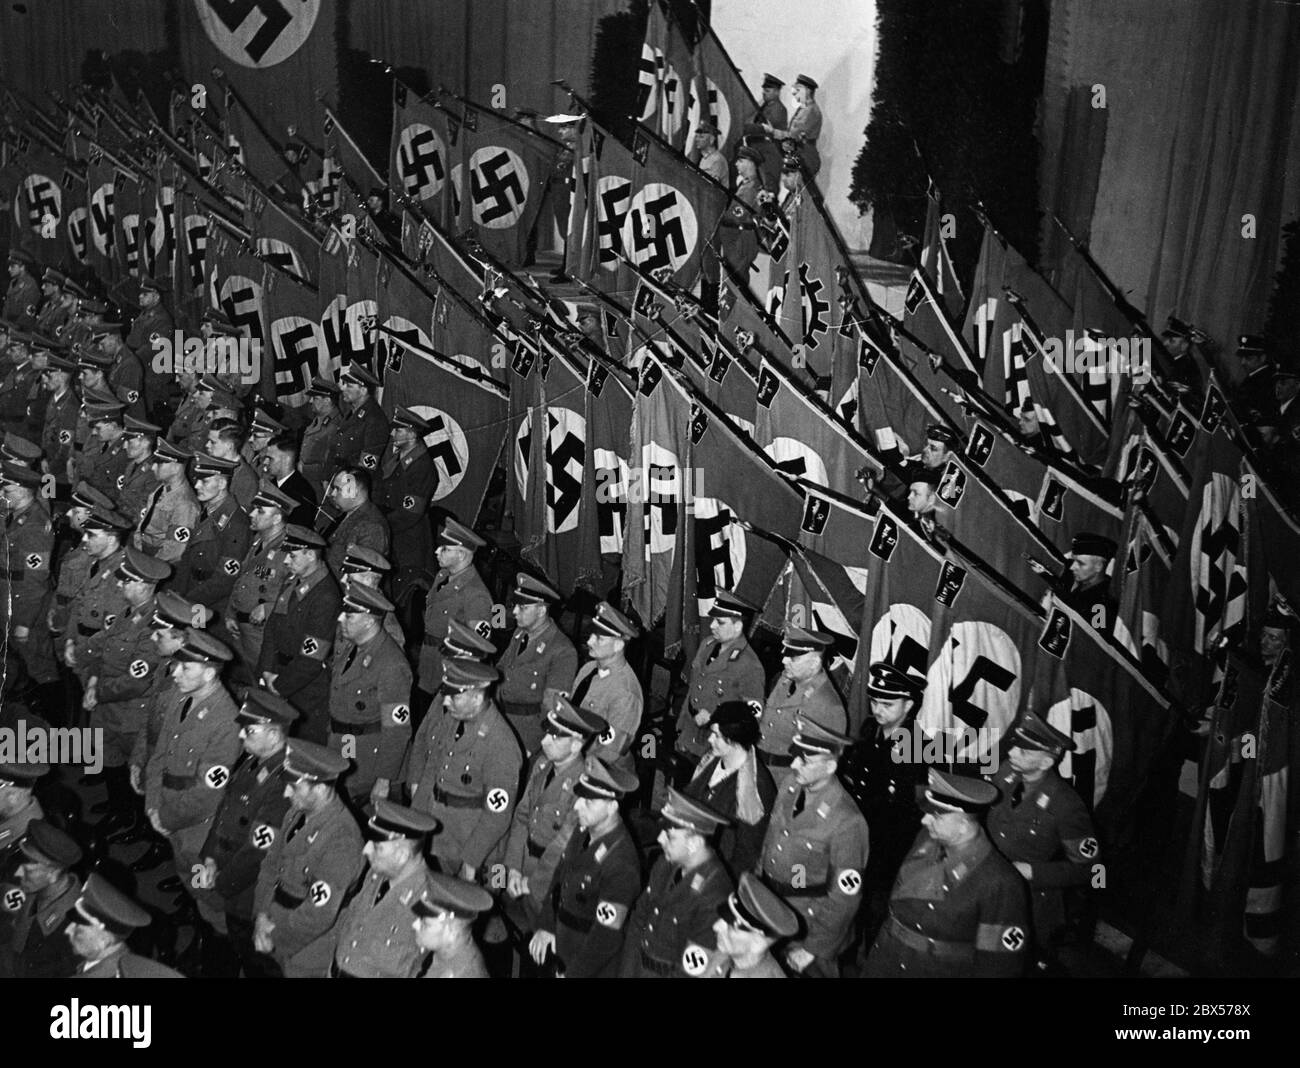 On the occasion of Adolf Hitler's birthday, political leaders are sworn in at the Sportpalast in Berlin. The flags are lowered in memory of the victims of the movement. Stock Photo